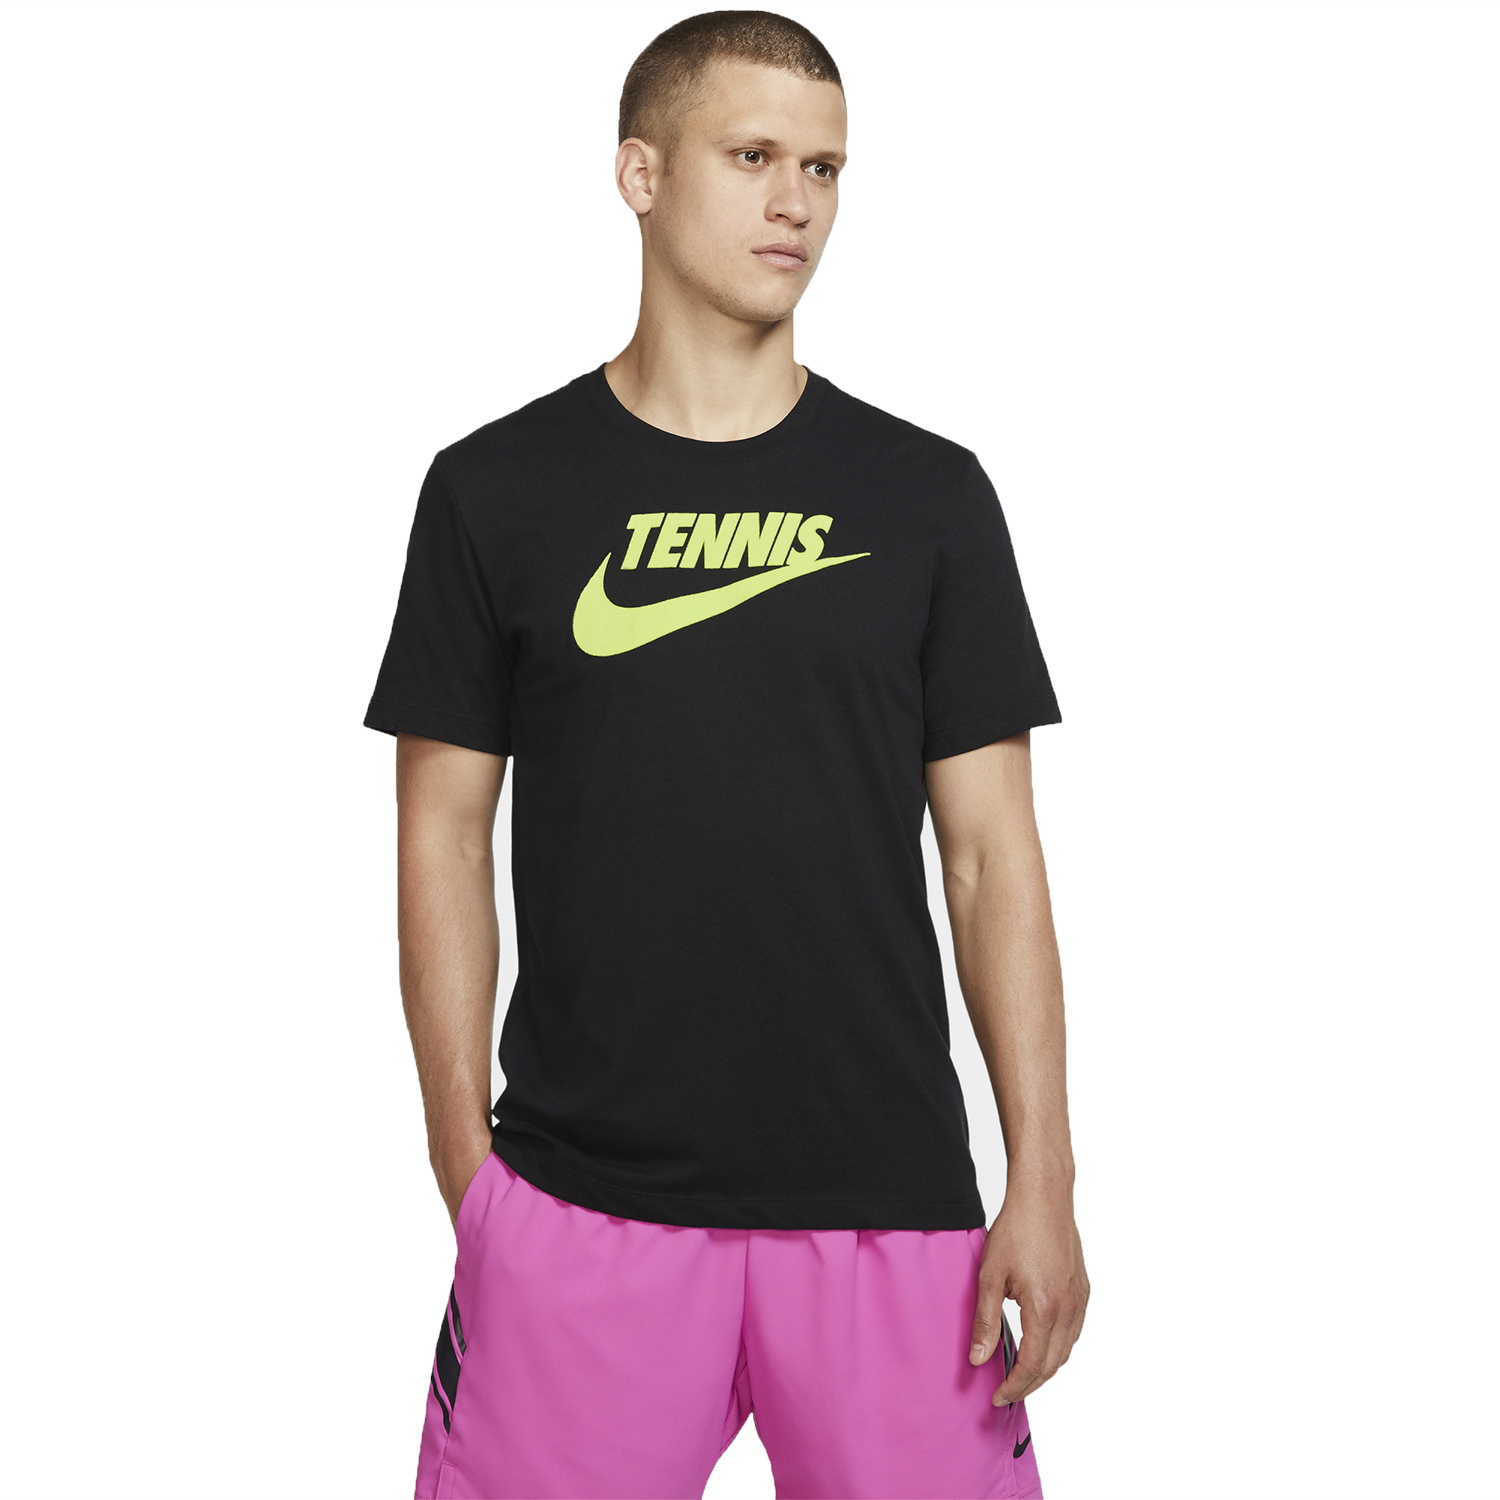 Cool Tennis T-shirts Tennis Player Clothing Sports Graphic 